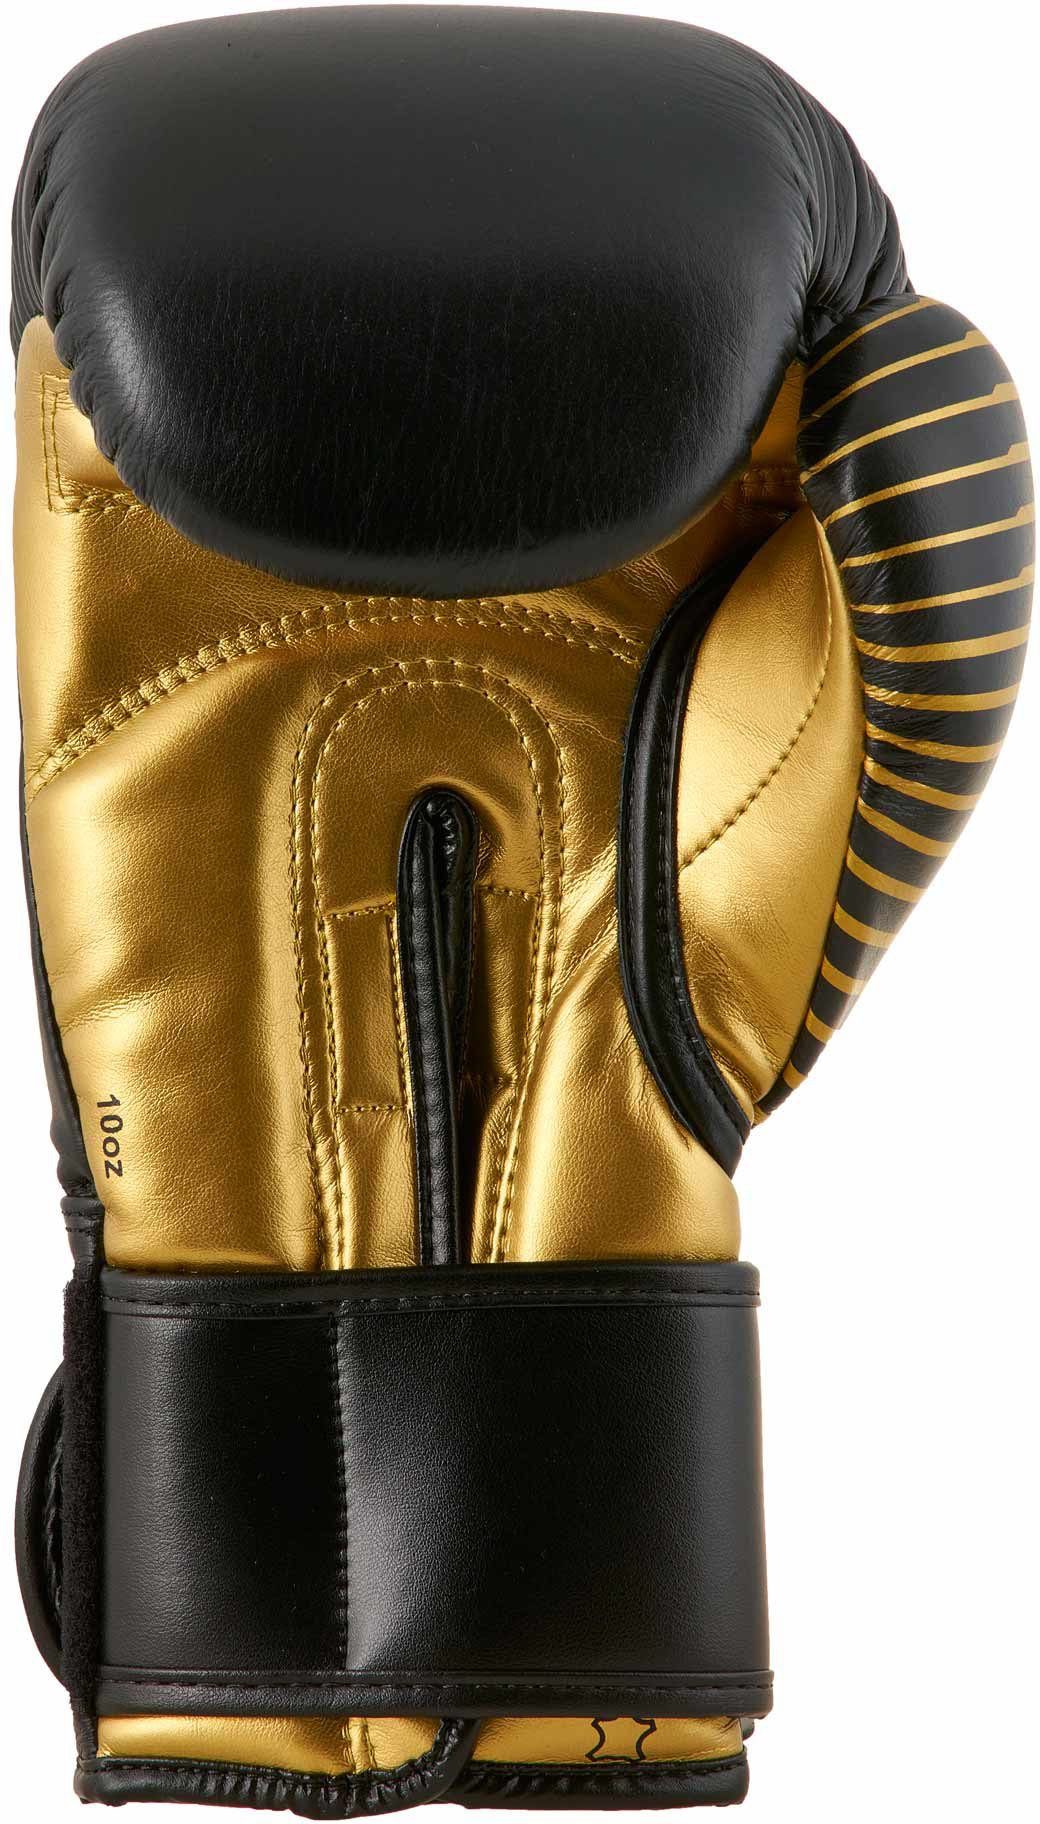 Handschuh Boxhandschuhe adidas Competition Performance black/gold